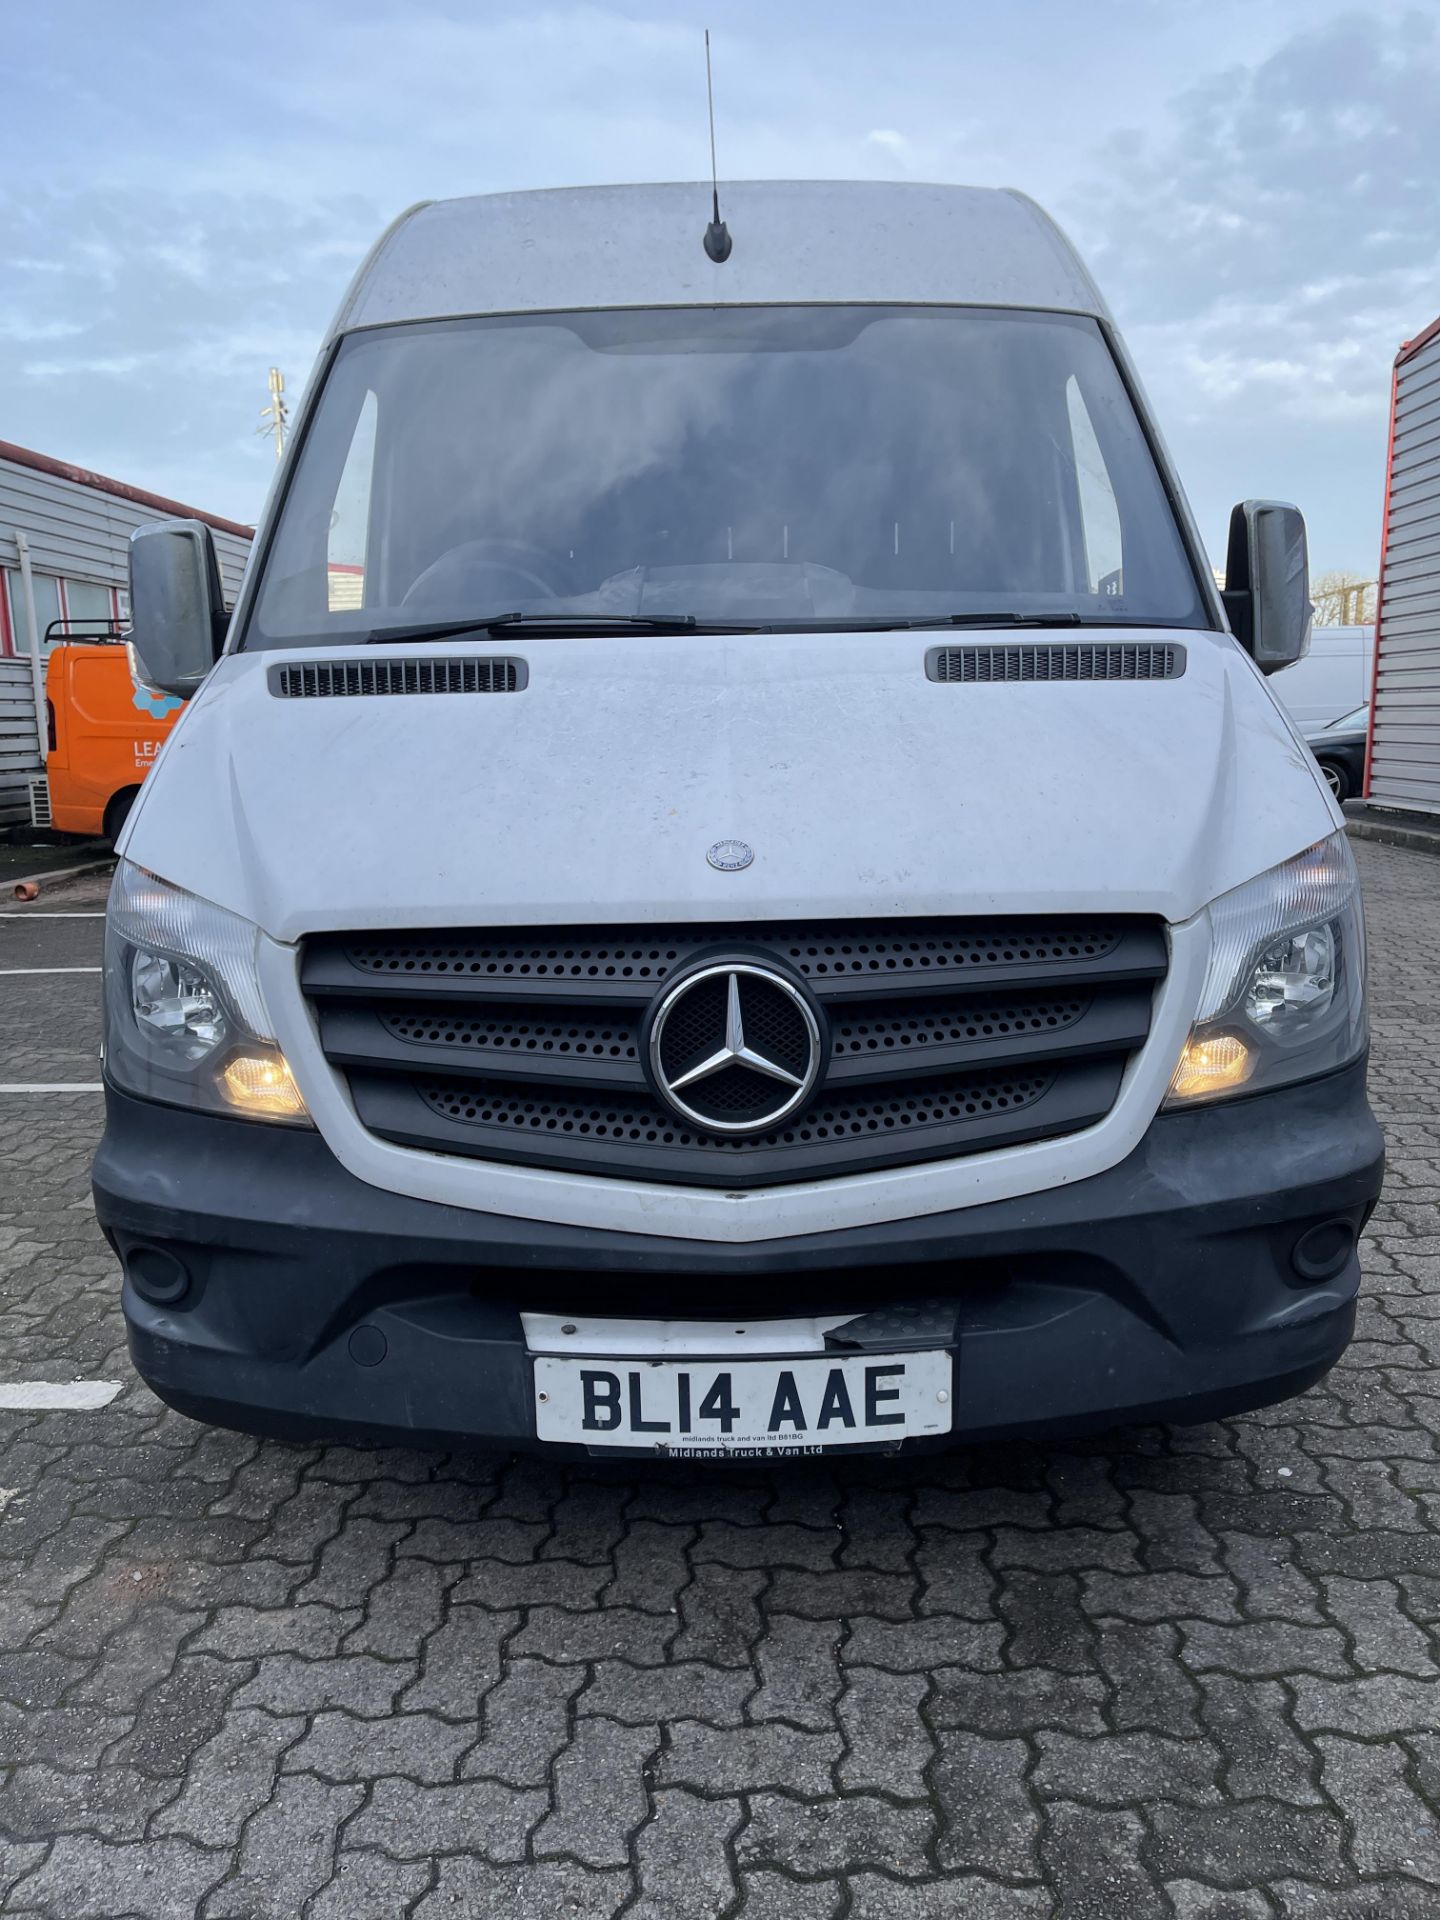 2014 - Mercedes Sprinter MWB - Facelift Model - Low Miles for Age - Image 15 of 39